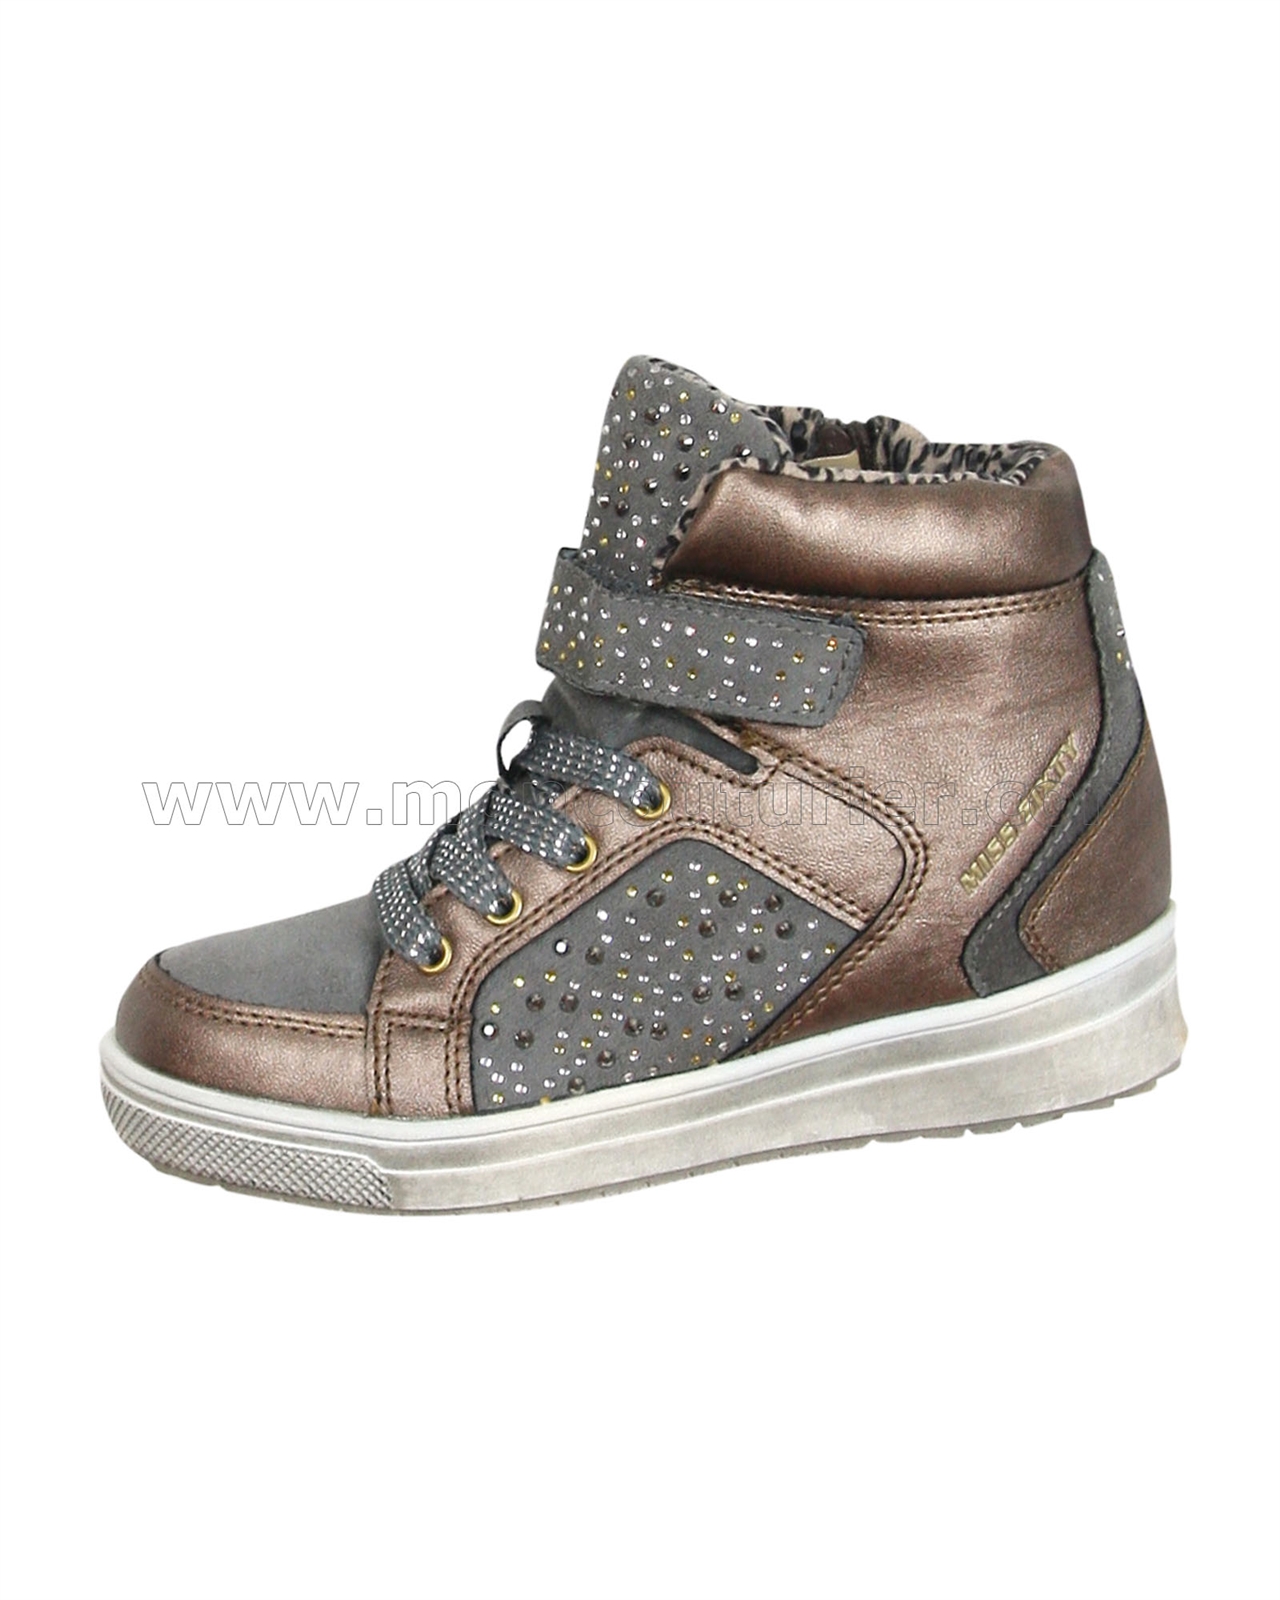 Miss Sixty Girls' Hi-top Sneakers with 